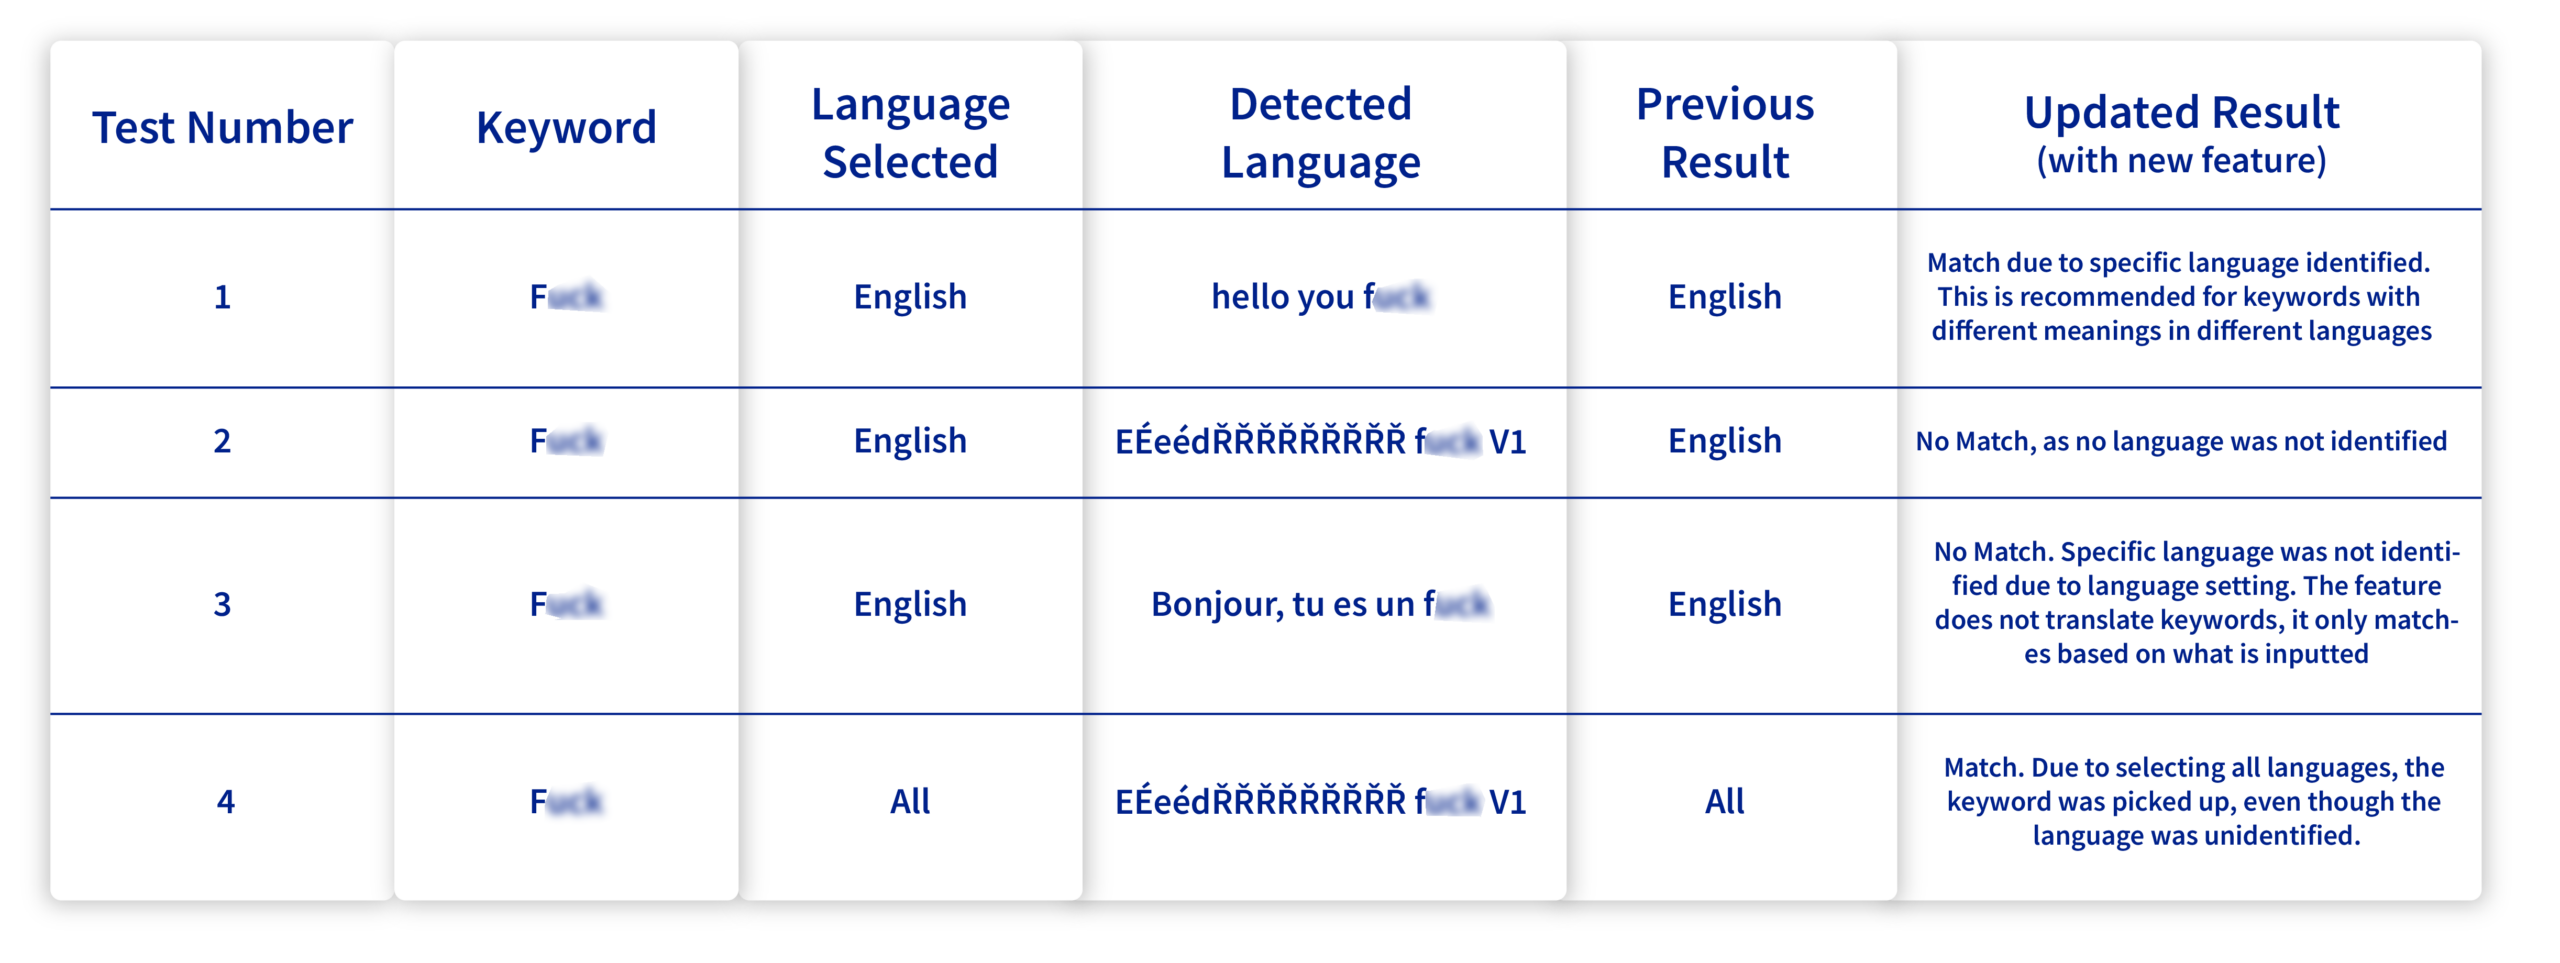 Table showing test results for keyword detection in different languages with columns for test number, keyword, language selected, detected language, previous result, and updated result.